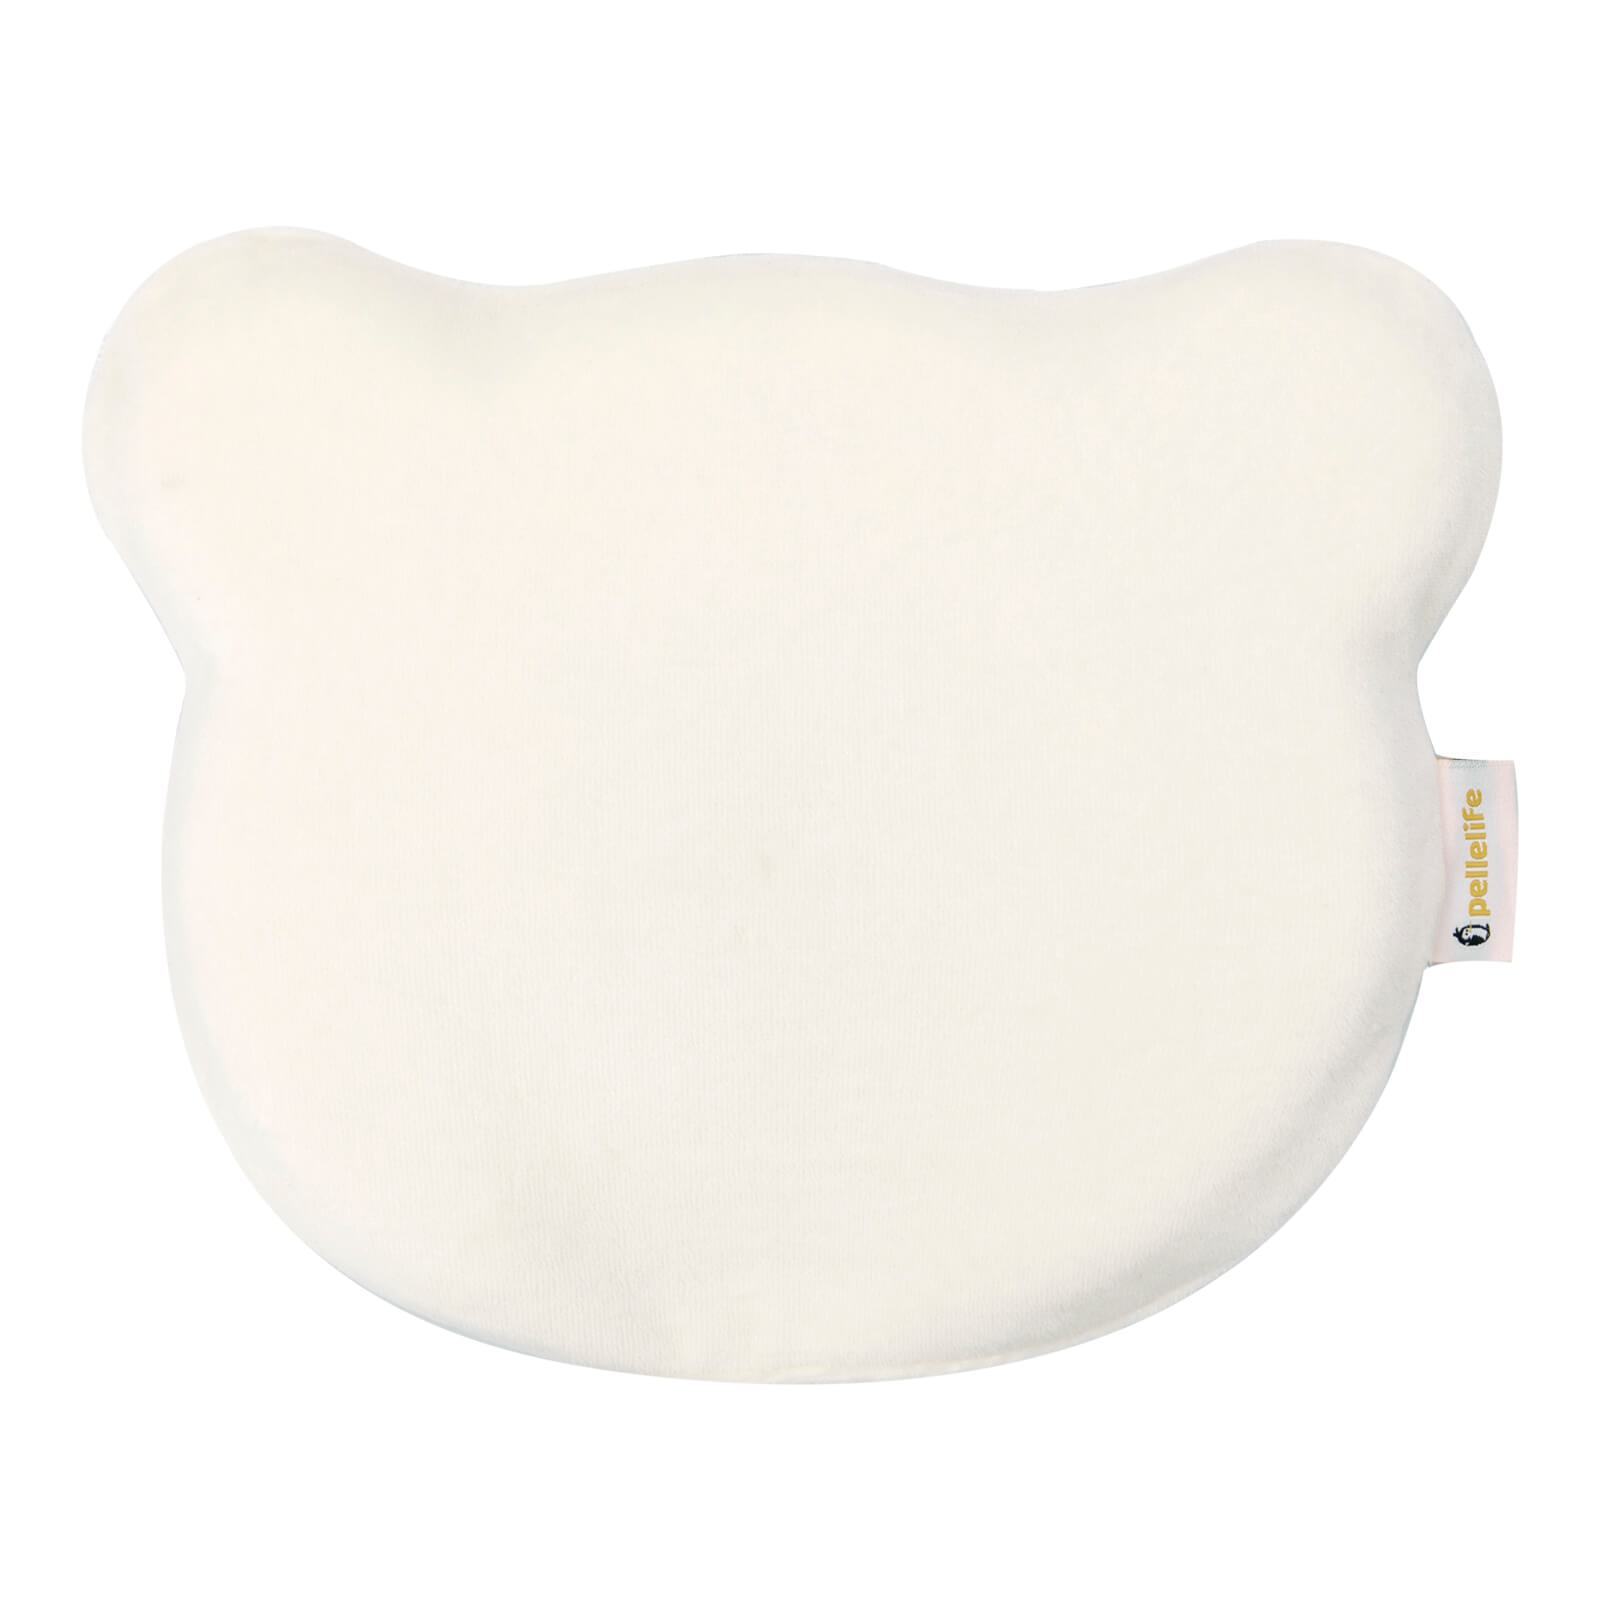 Baby Pillow against Head Shaping Breathable Velvet Fabric Memory Form Pillow for Infant-Whilte